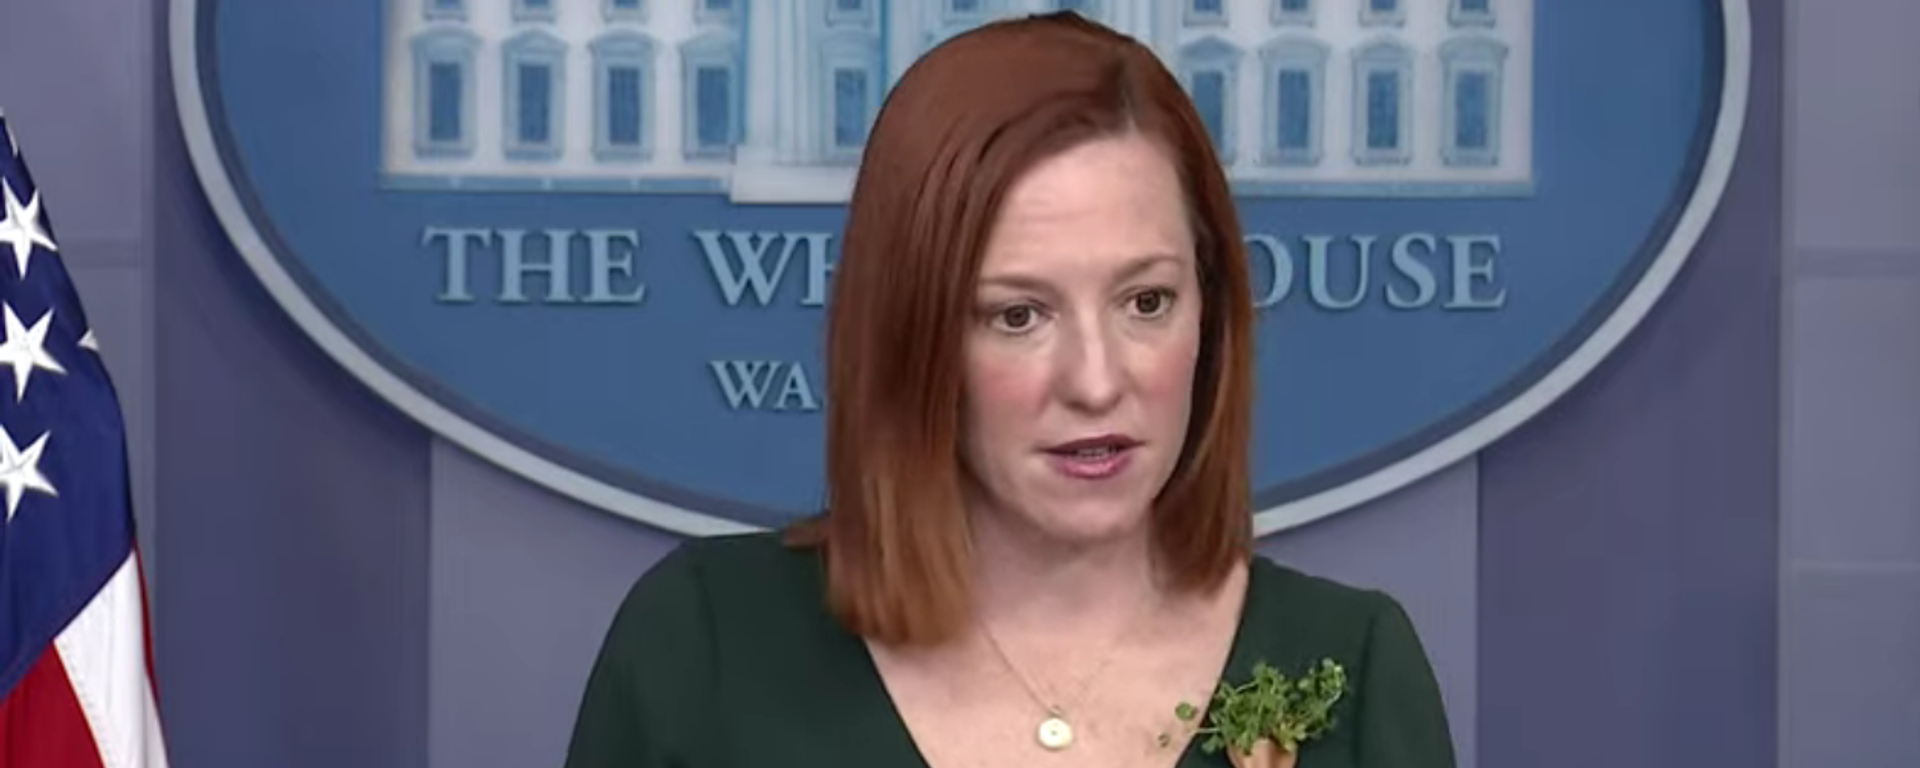 Press Secretary Jen Psaki answers questions from reporters about the future of US-Russian relations in the aftermath of a US intelligence report claiming Russia attempted to influence the 2020 US elections on March 17, 2021 - Sputnik International, 1920, 25.03.2021